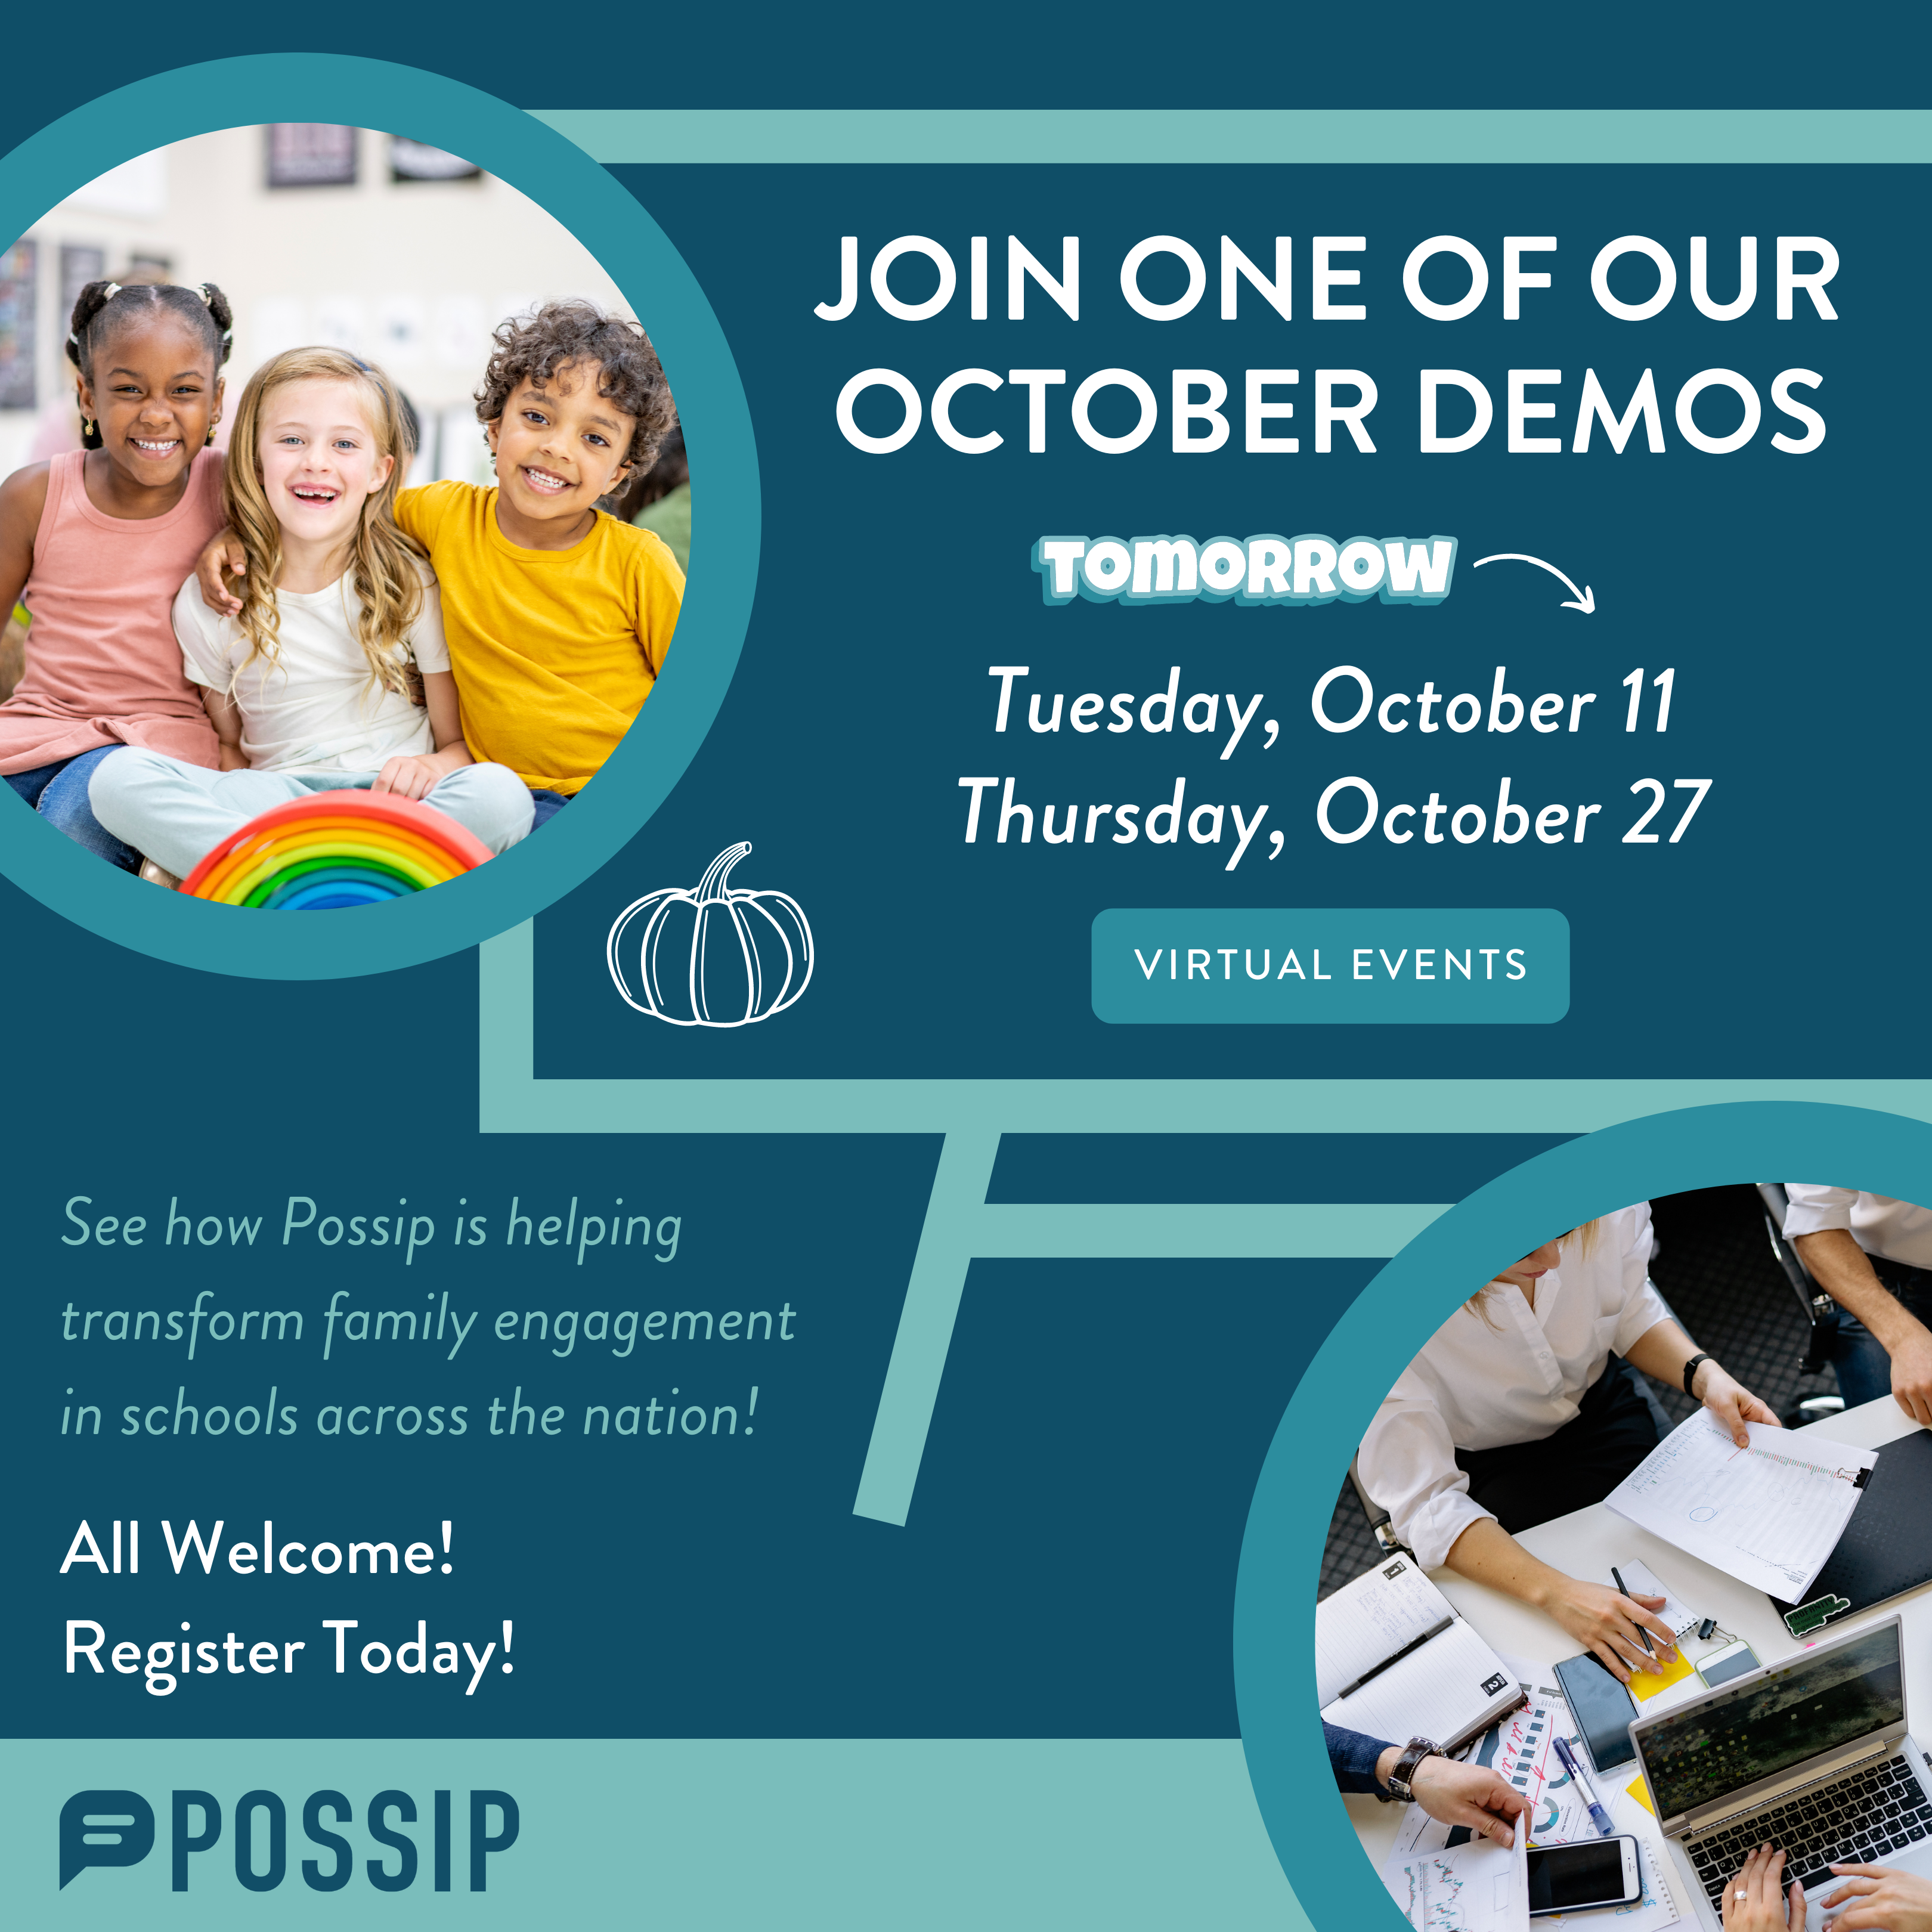 Join one of our October Demos